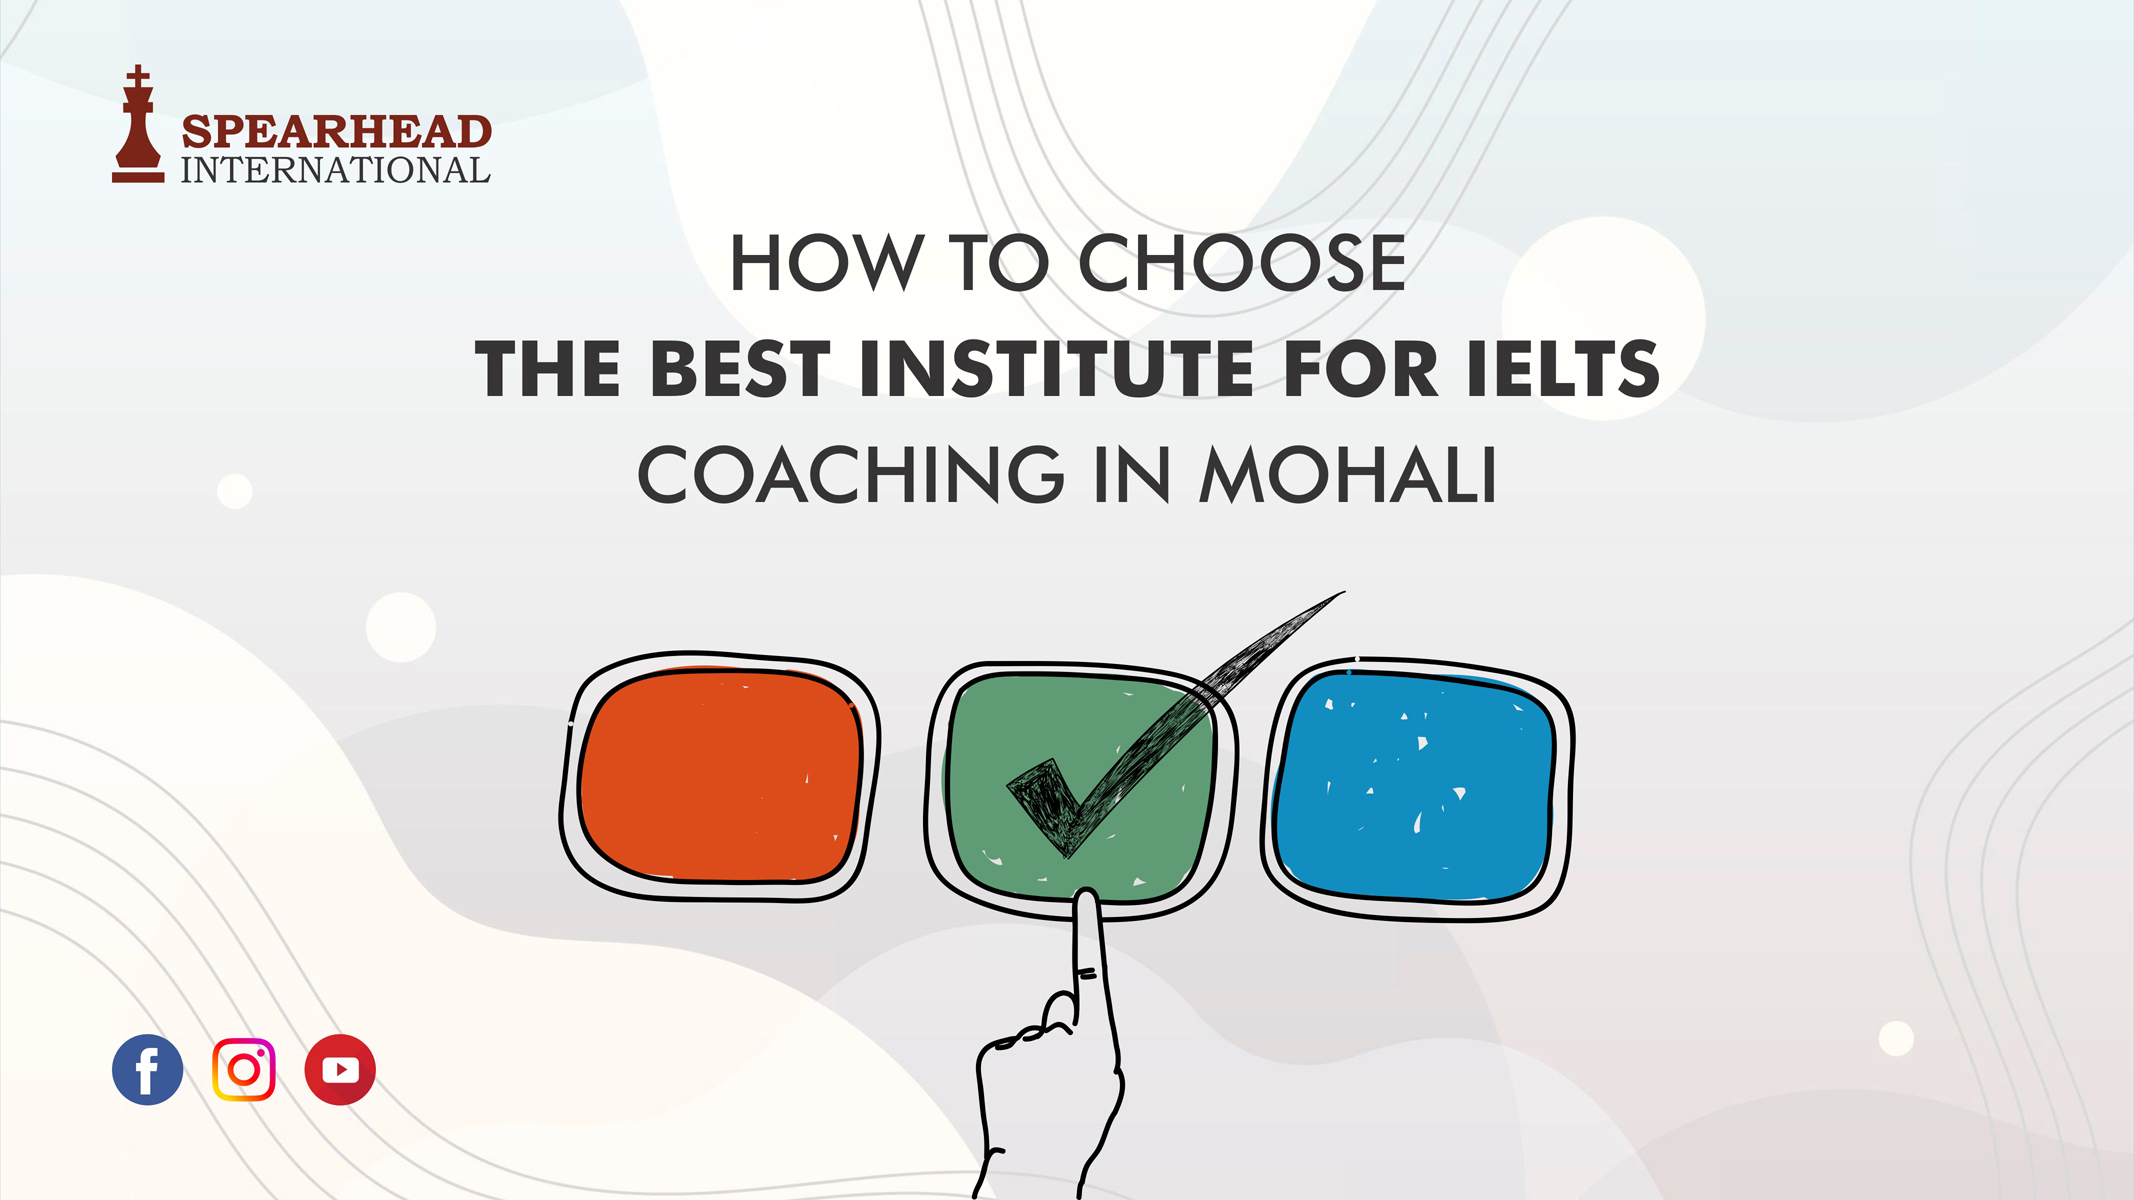 How to choose the best institute for IELTS coaching in Mohali